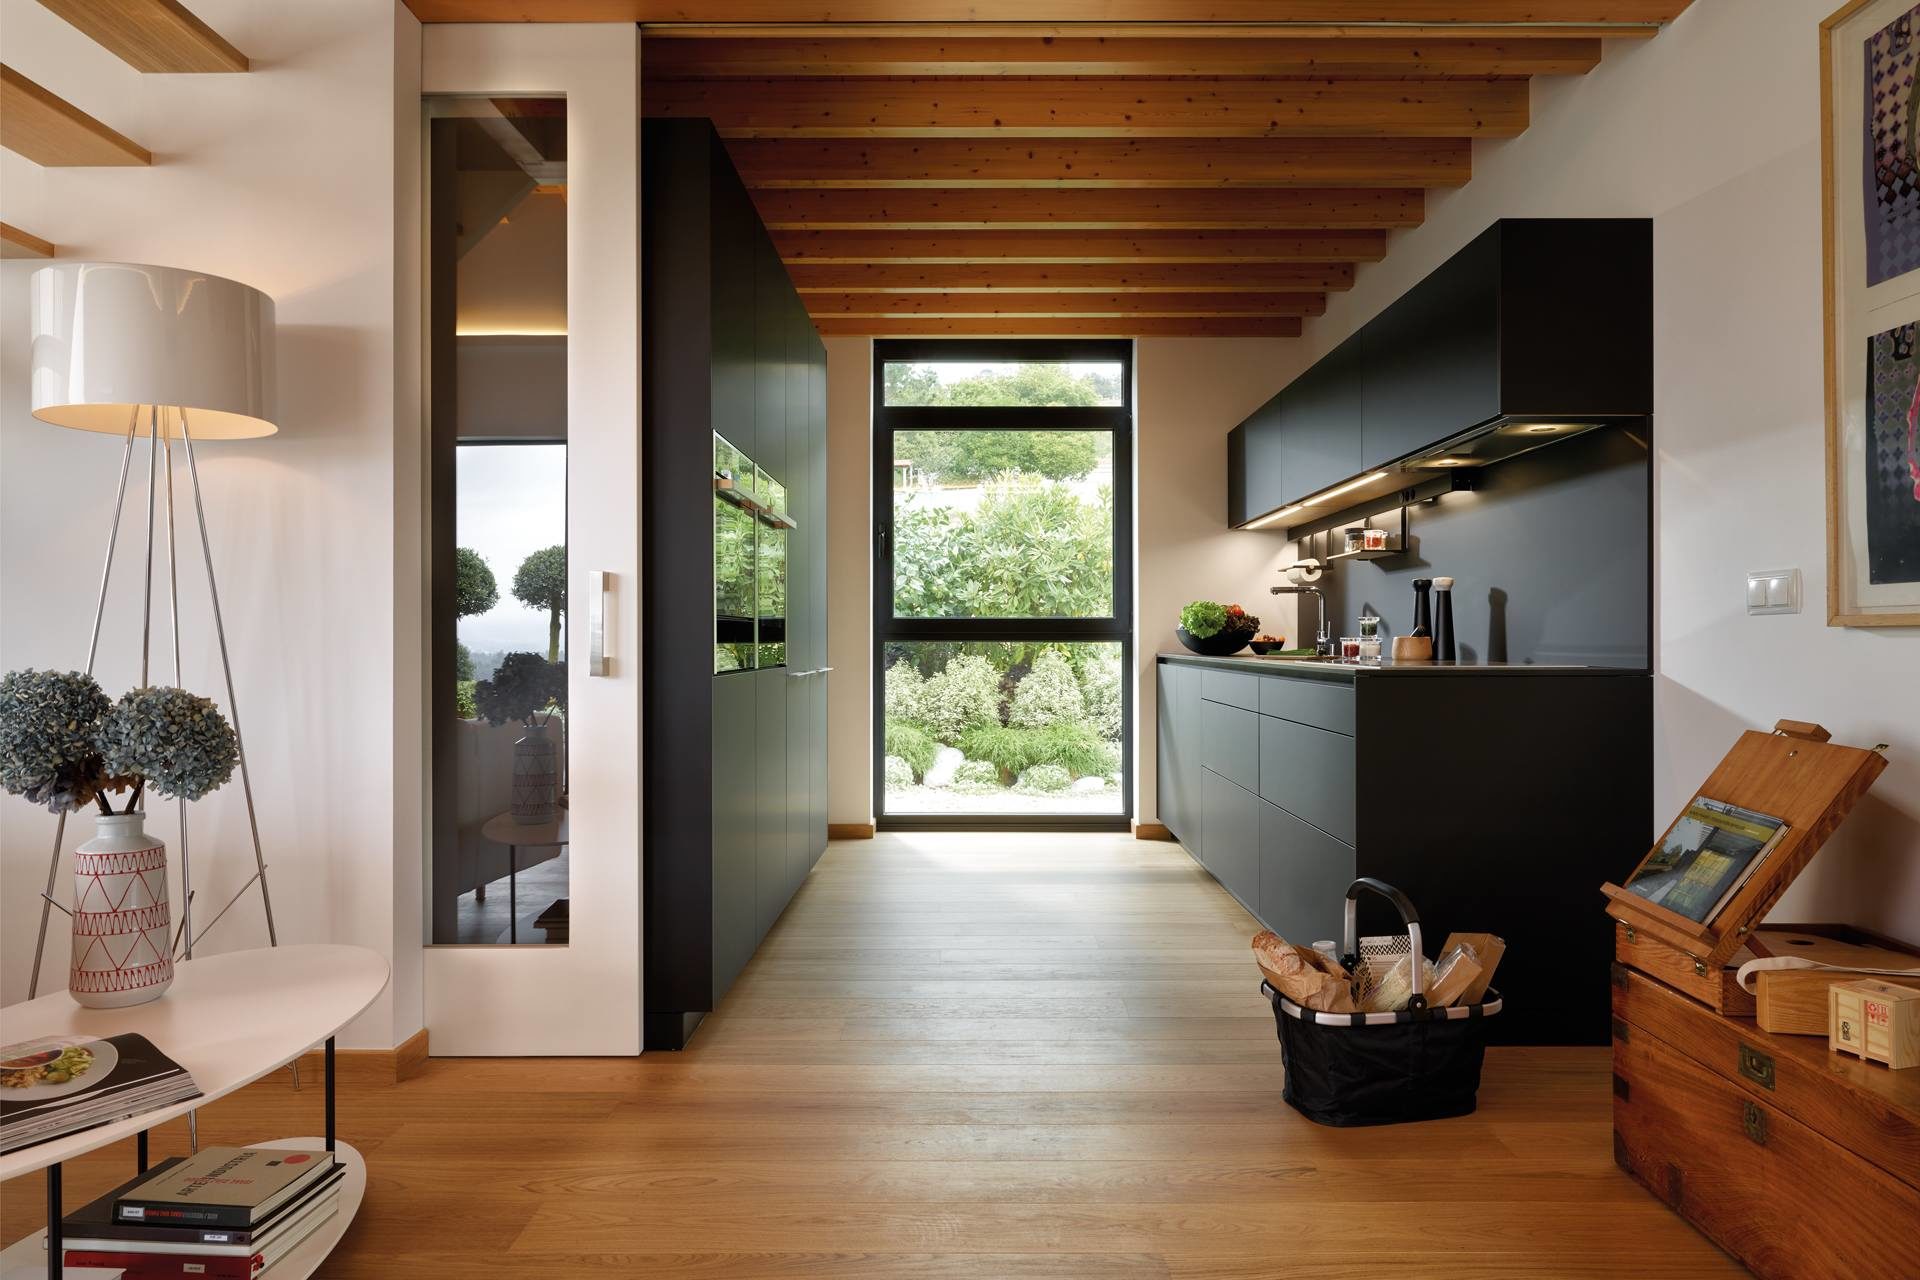 Photo of black kitchen integrated in an interior with wood on the ceiling and floor 